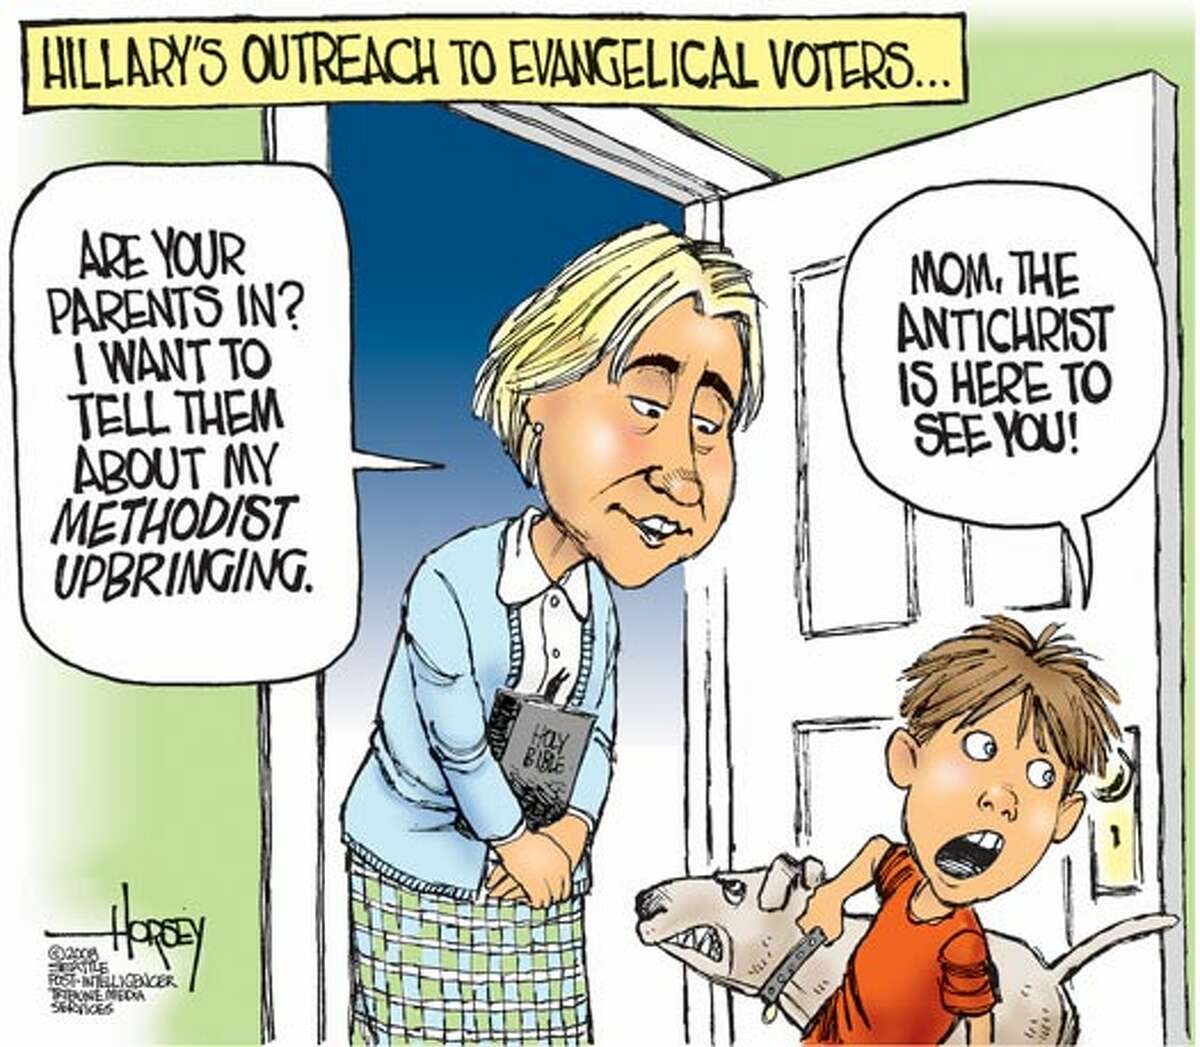 Hillary's outreach to evangelical voters